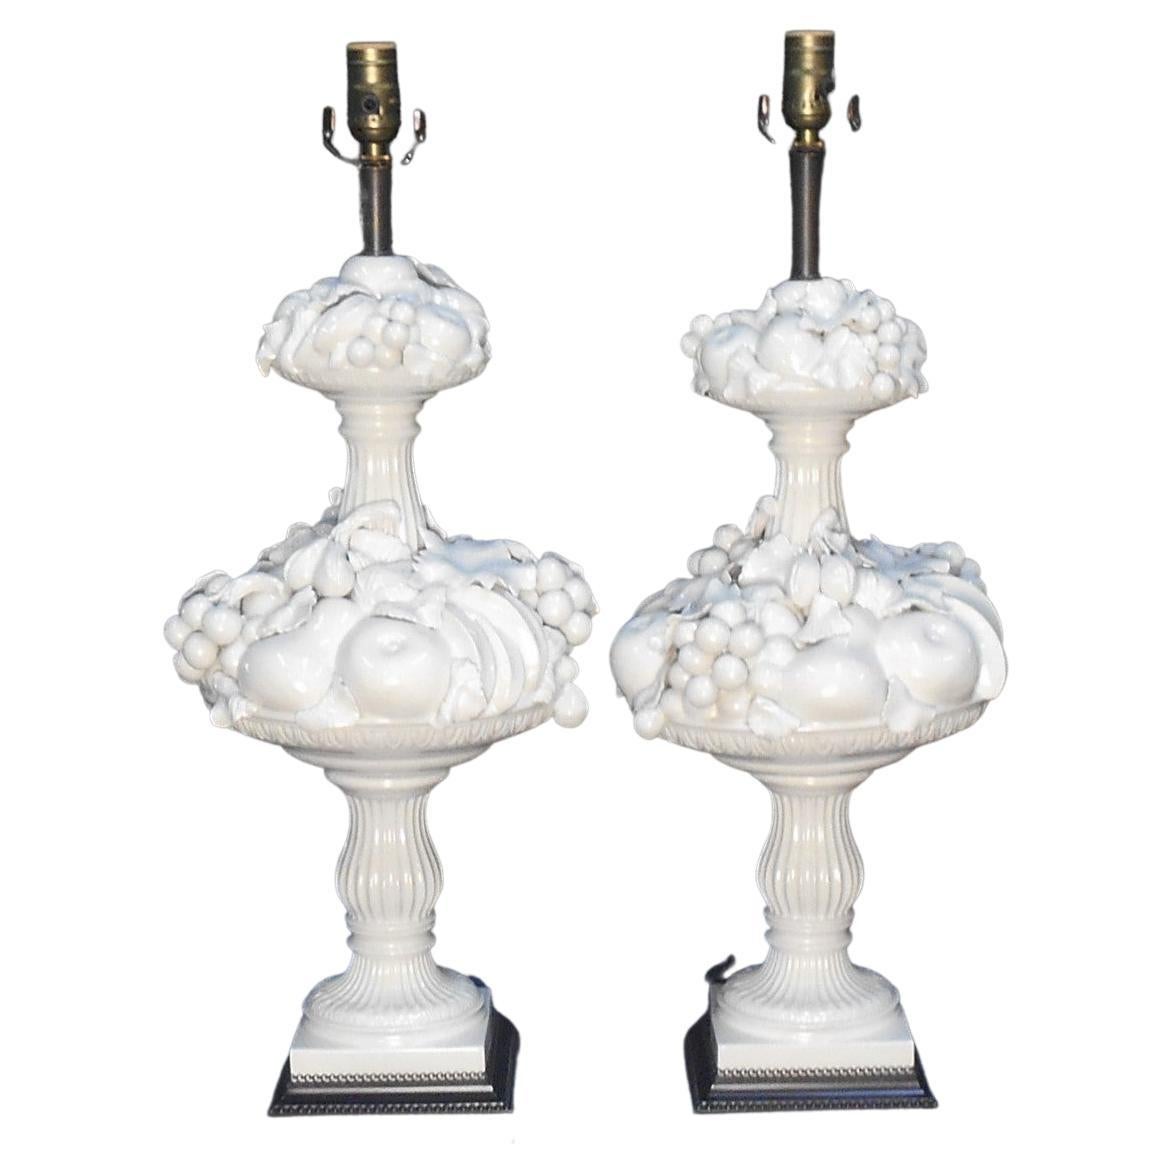 1960's Italian Blanc De Chine Fruit Topiary Table Lamps, a Pair